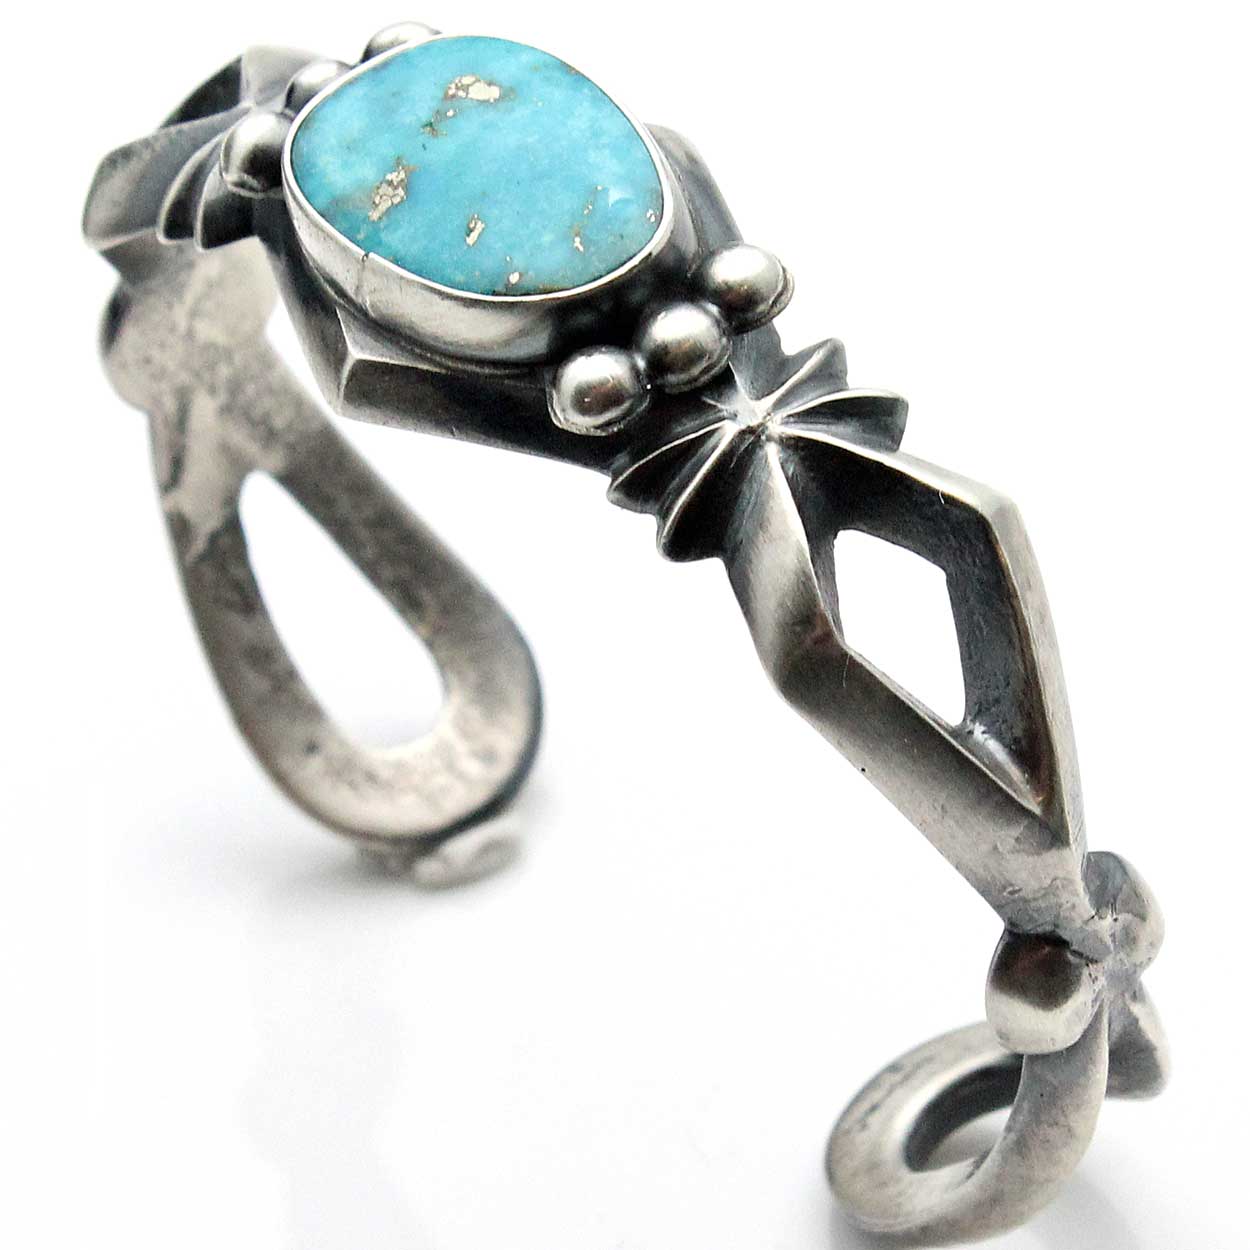 Navajo Silver Cast Bracelet with Turquoise by Harrison Bitsui